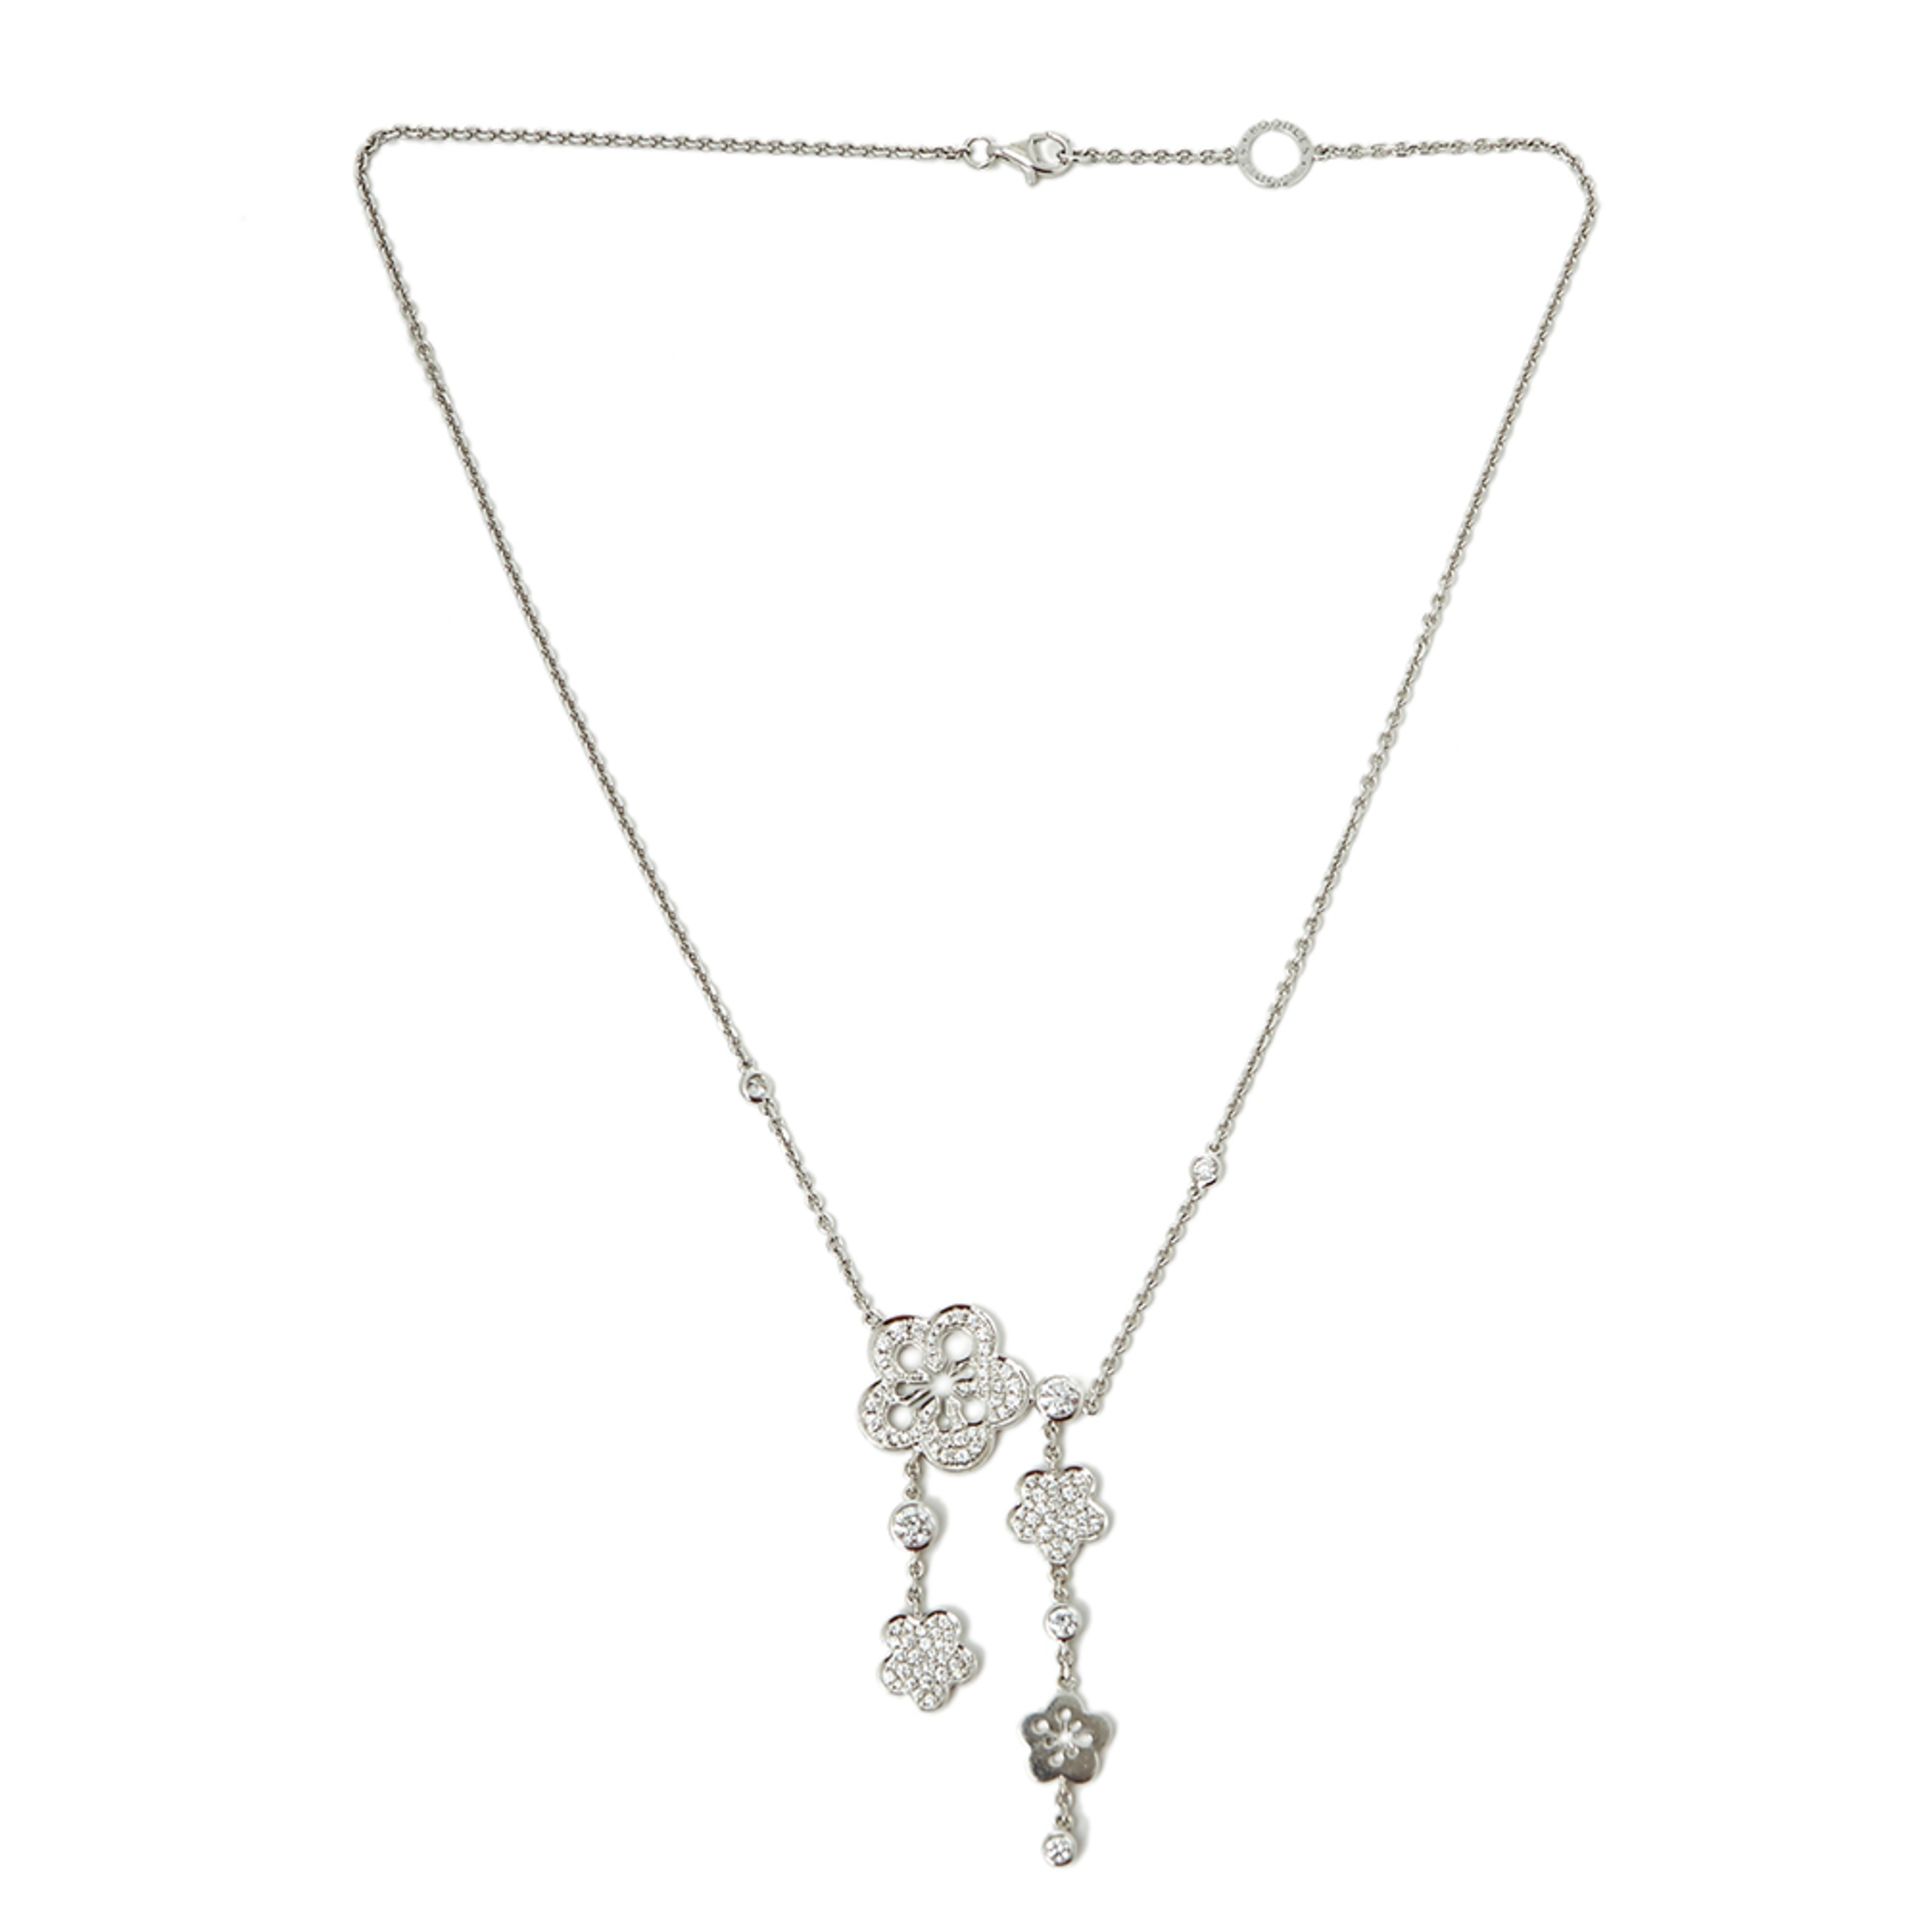 Boodles 18k White Gold Diamond Blossom Necklace - Image 9 of 10